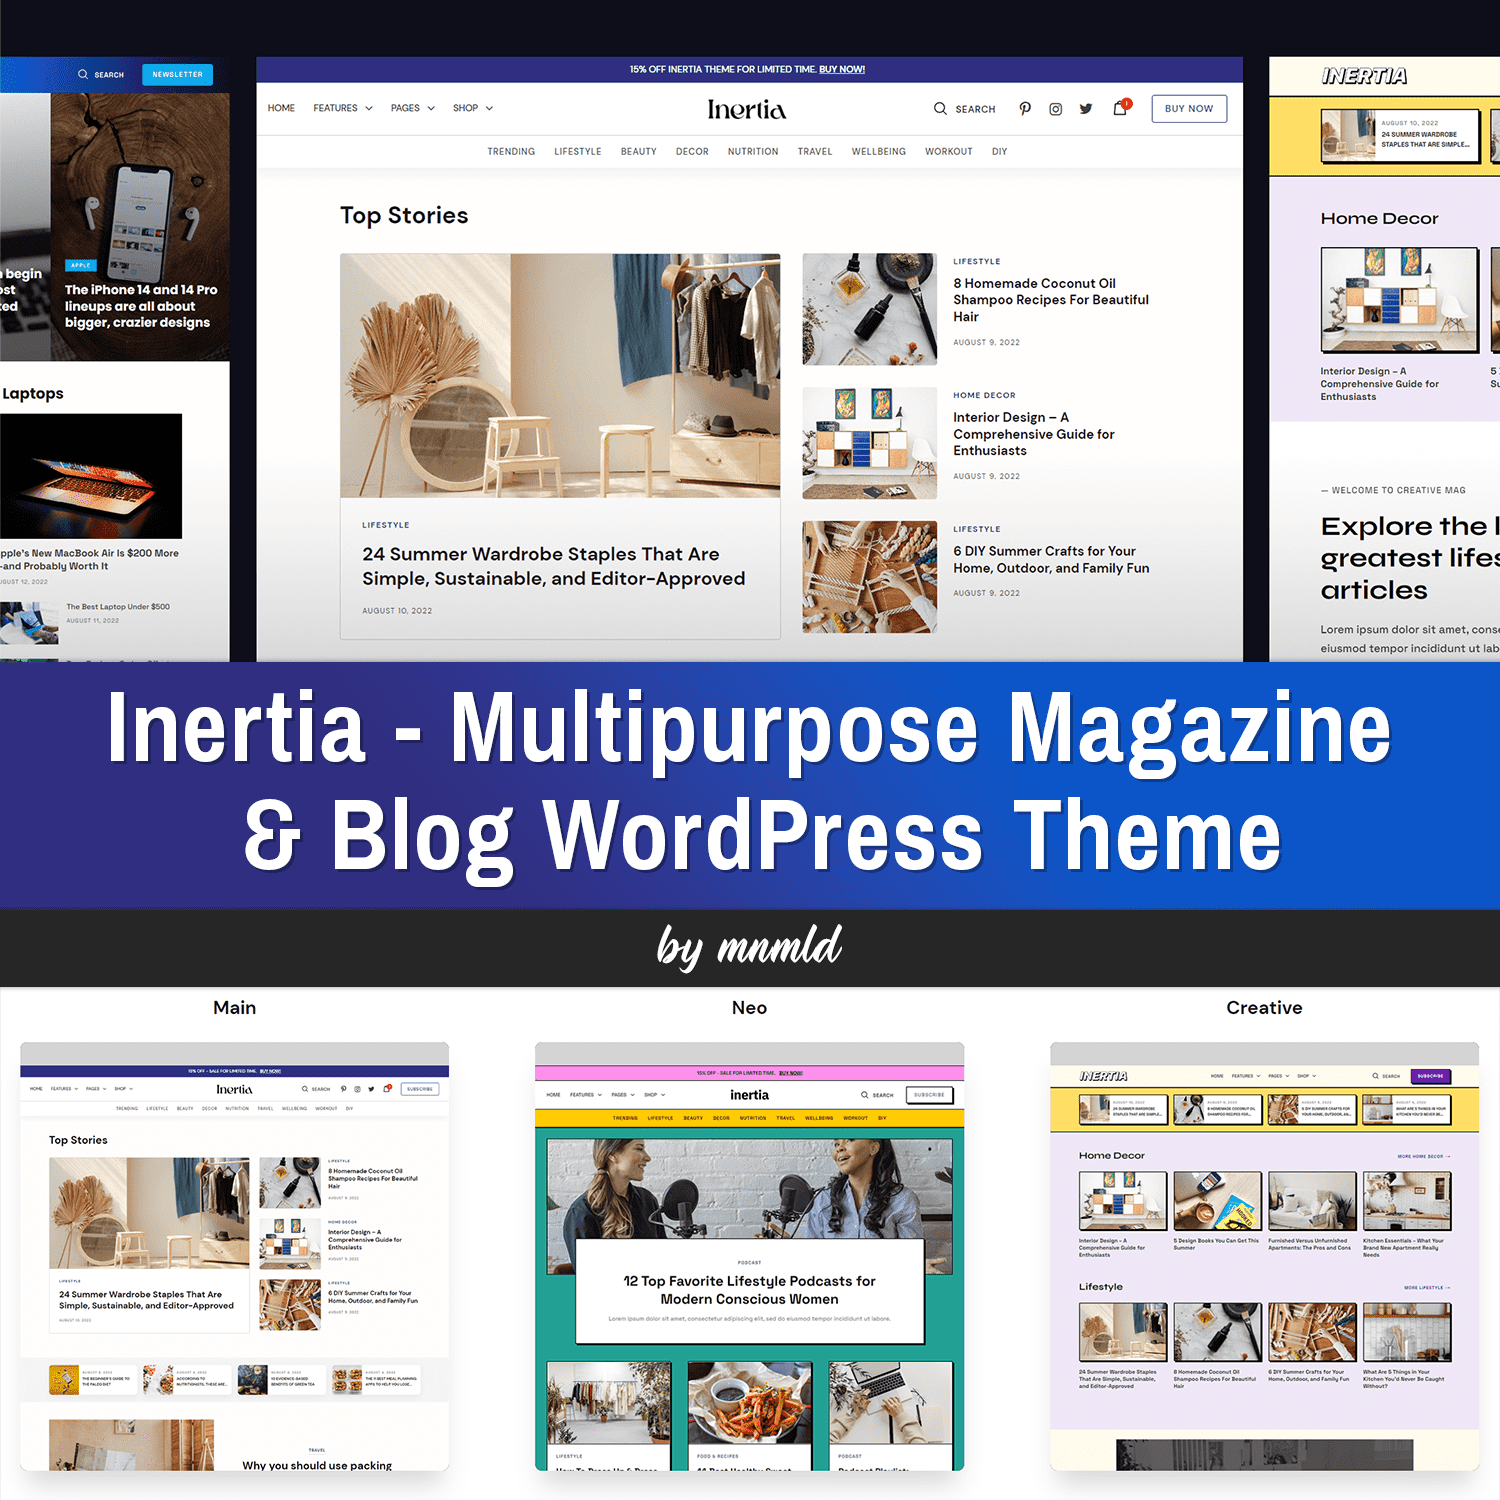 An article “24 Summer wardrobe staples that are simple, sustainable, and editor-approved” of the Interia WordPress.